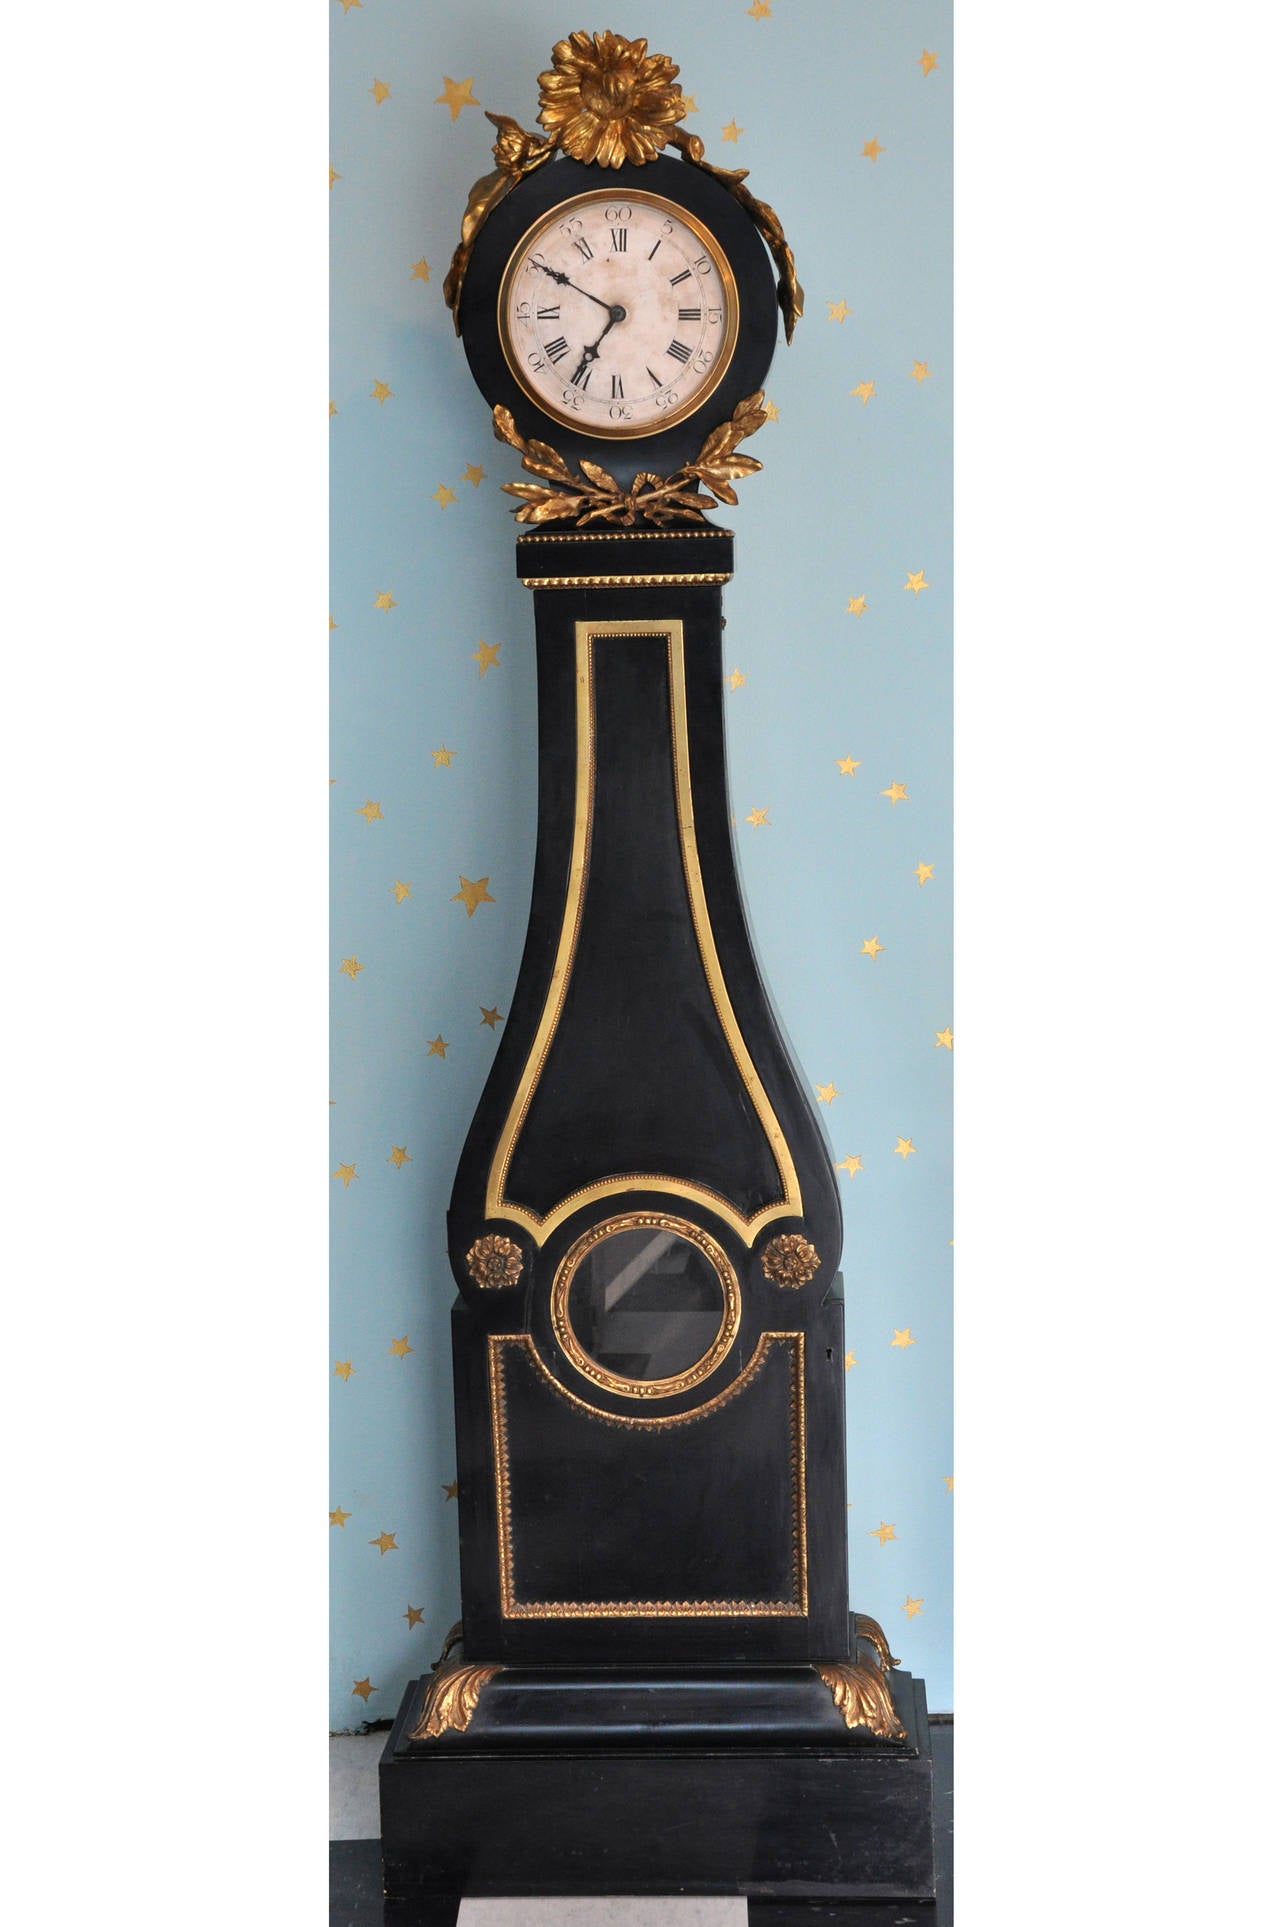 Antique French tall case clock - vintage 19th Century.  Clock has been converted to battery operated.  Clock has applied bronze wreath decorations and the top of the clock is crowned with a beautiful gold leafed carved wood flower with trailing